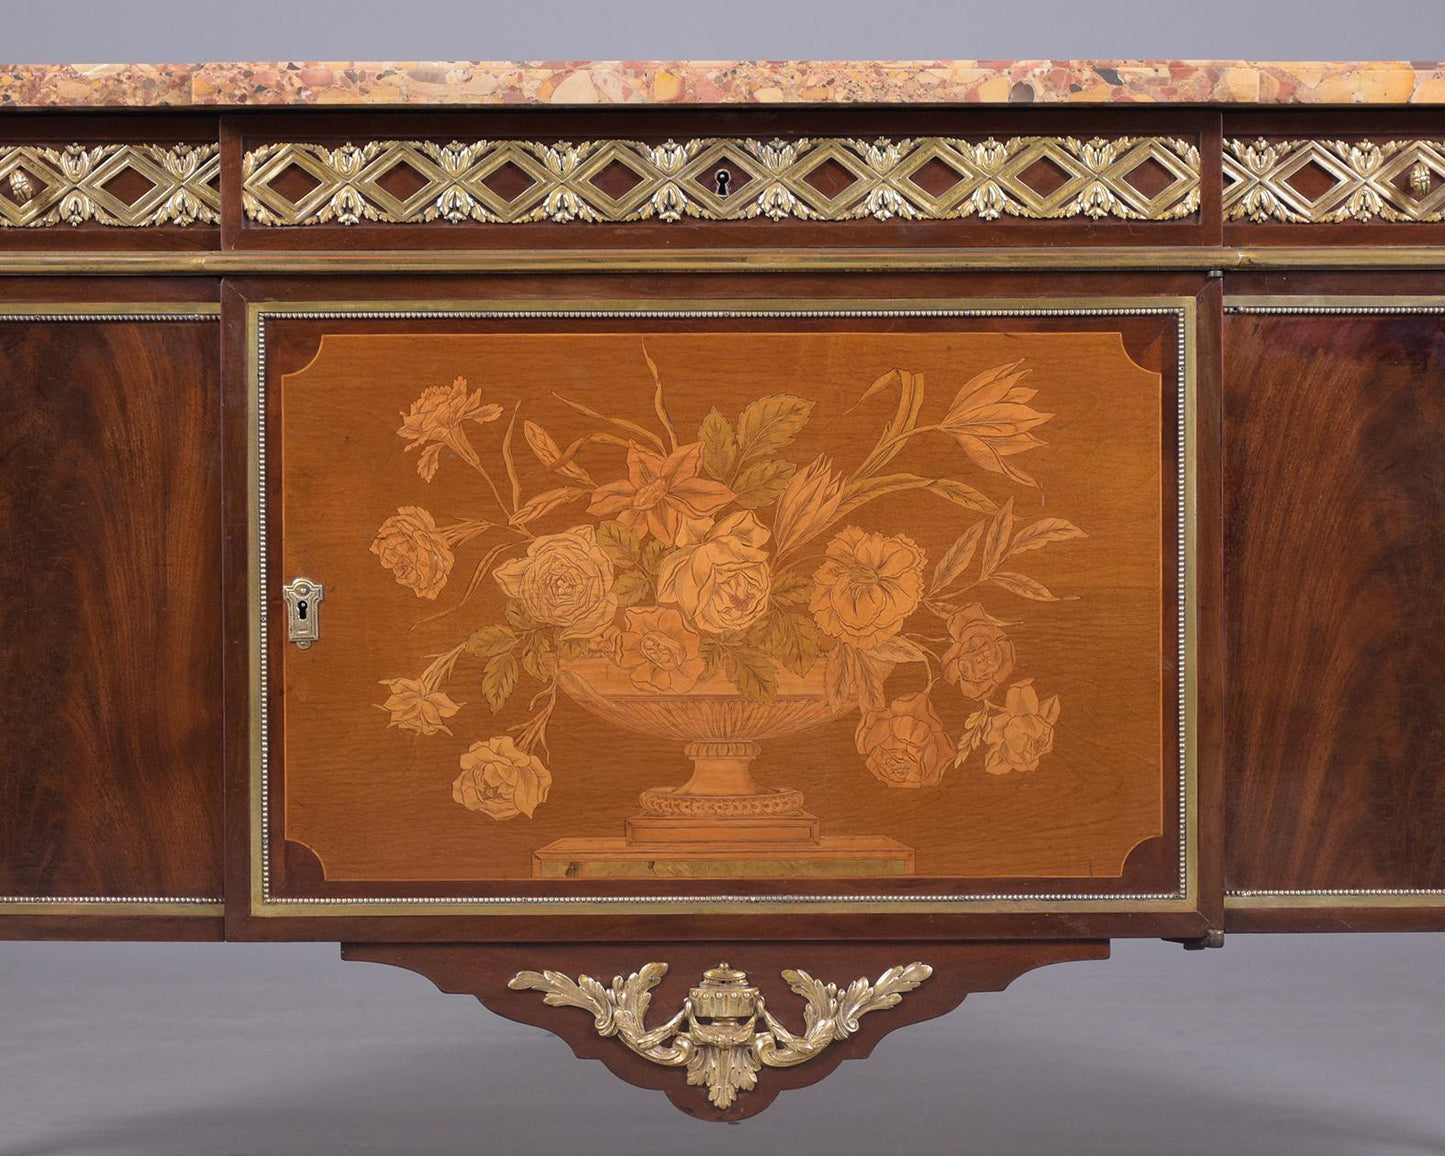 19th Century French Louis XVI Marquetry Commode